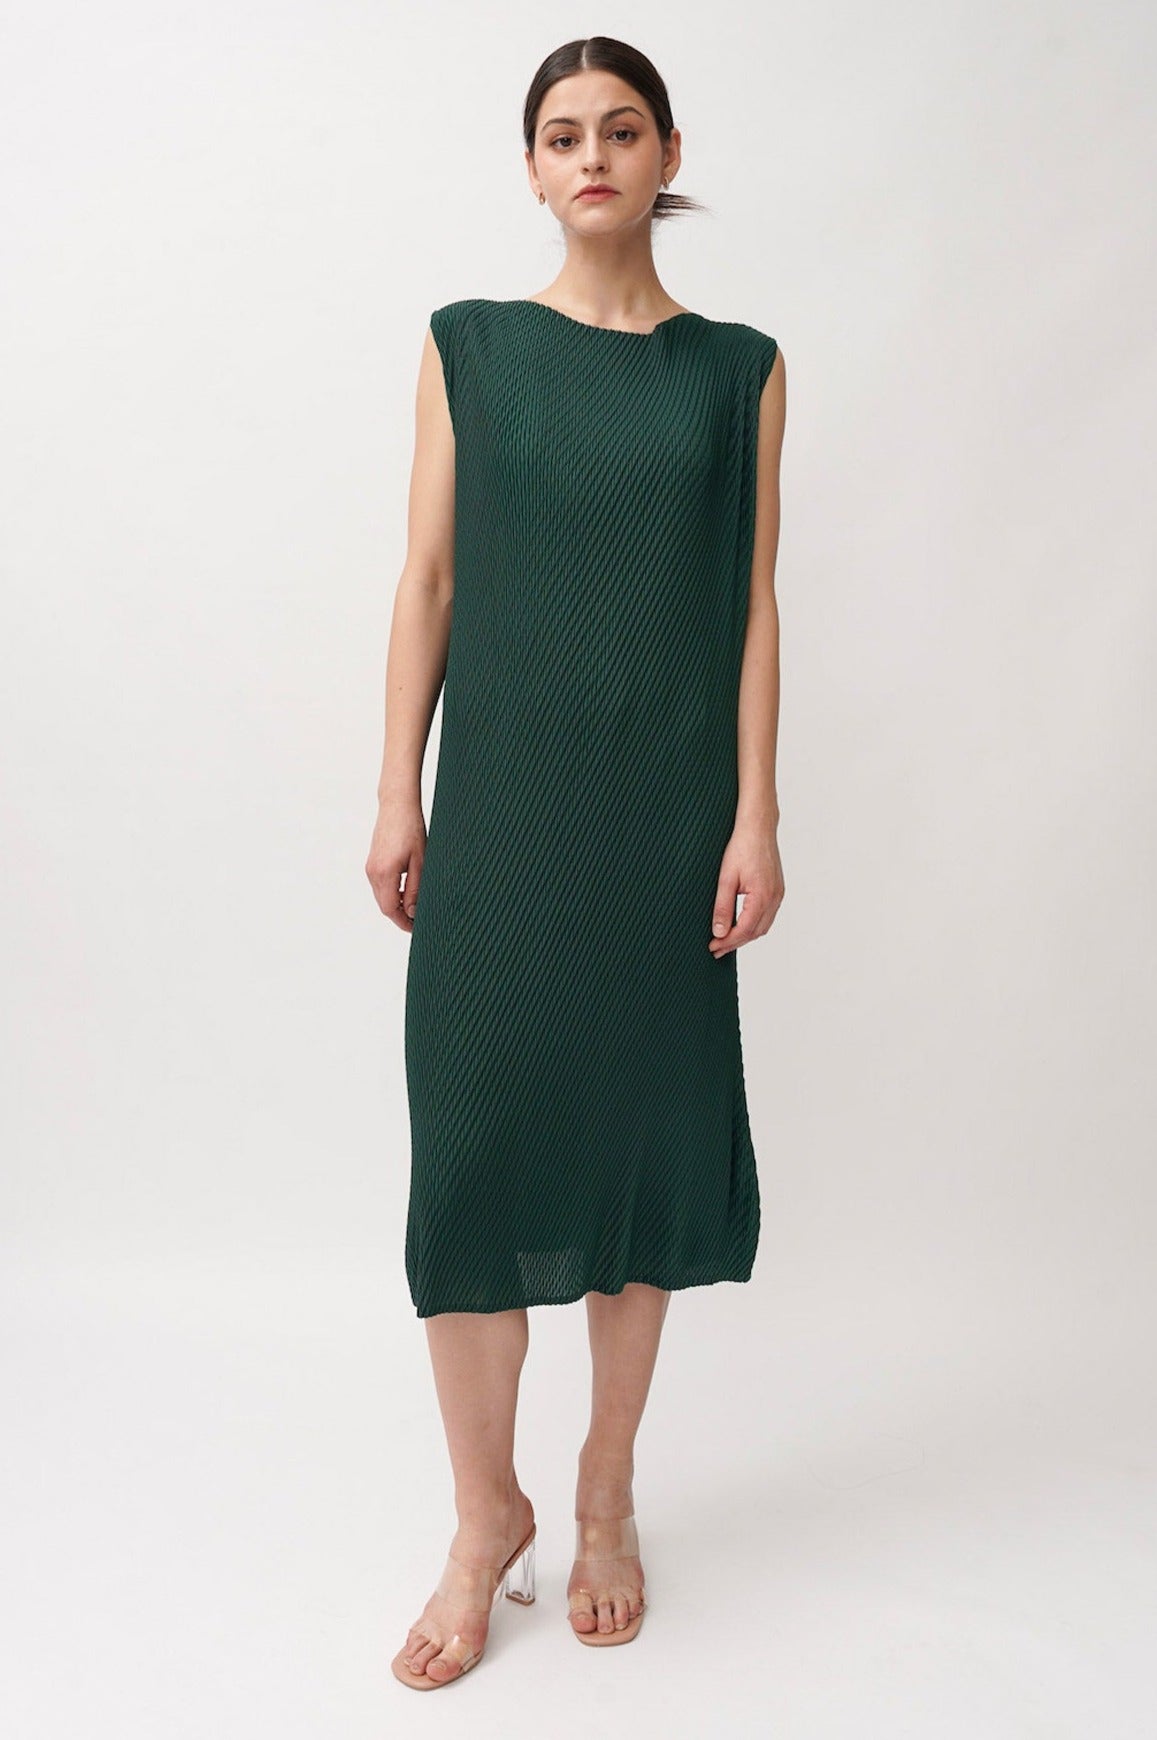 Galicia Pleats Dress In Forest Green (4 Left)